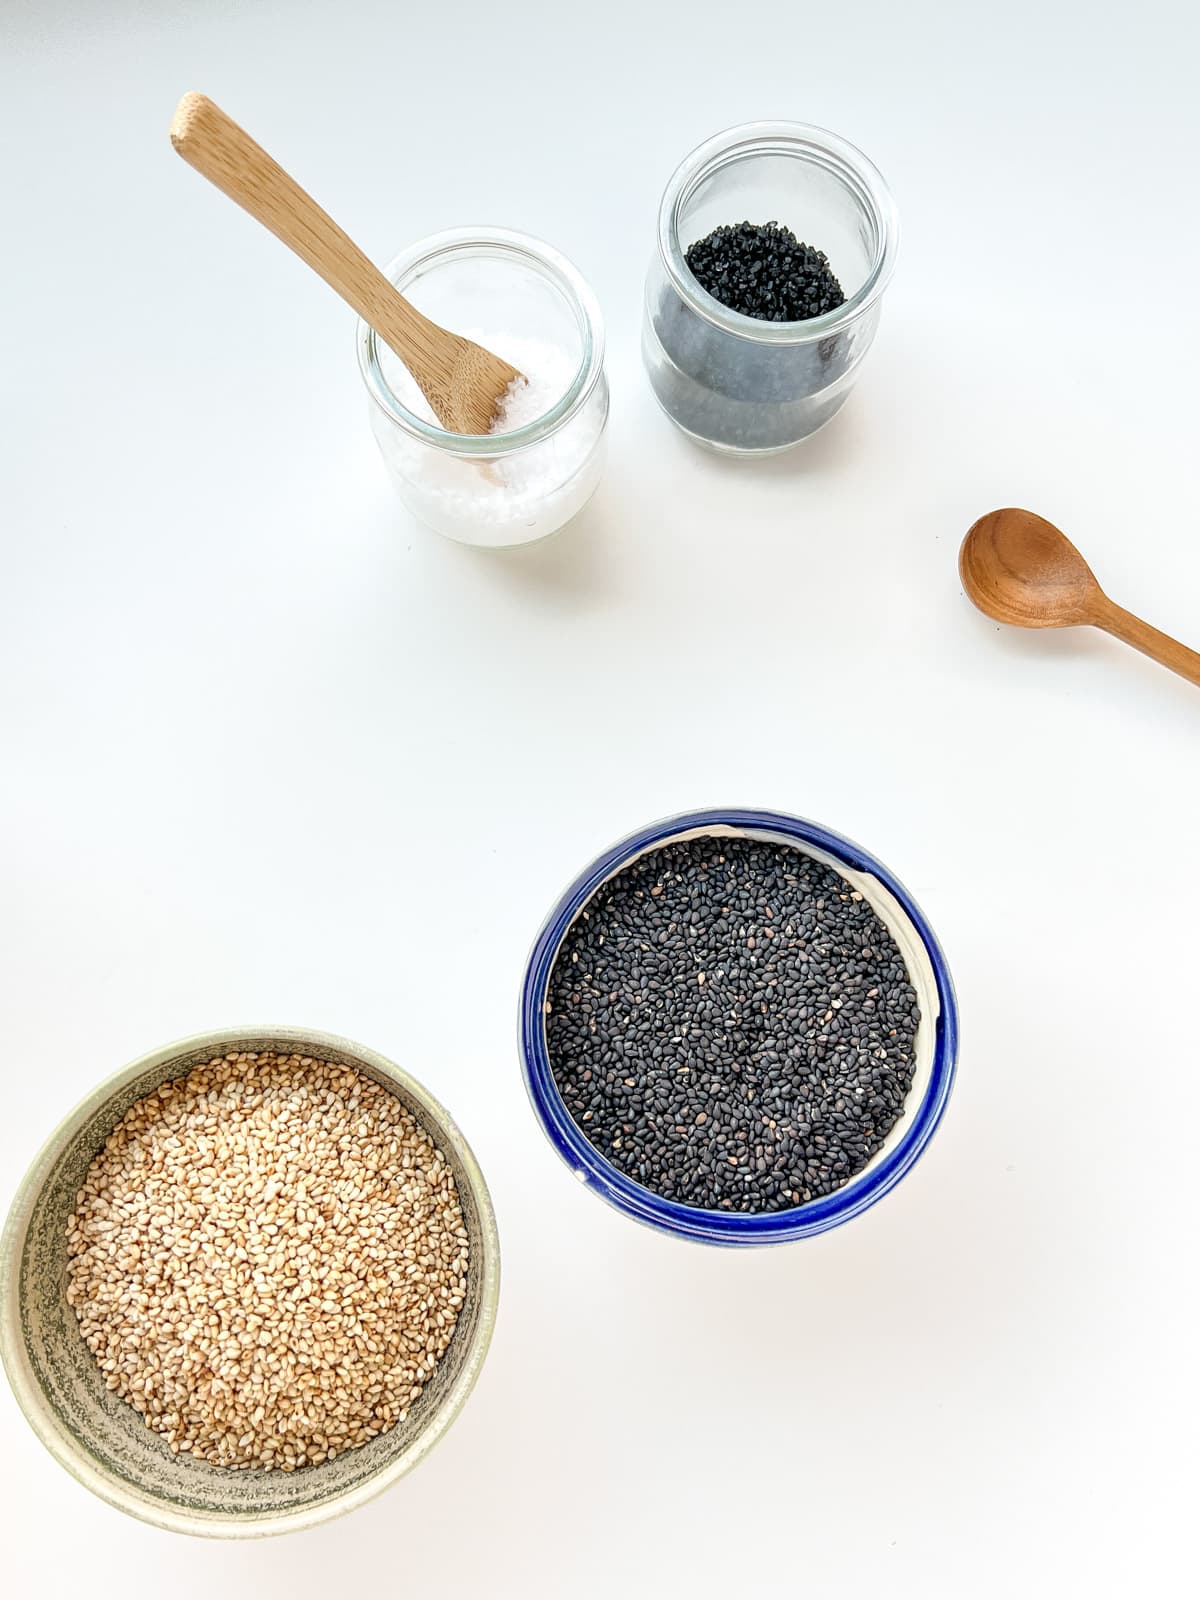 An image of four small containers against a white counter, containing white sesame seeds, black sesame seeds, sea salt, and black salt.